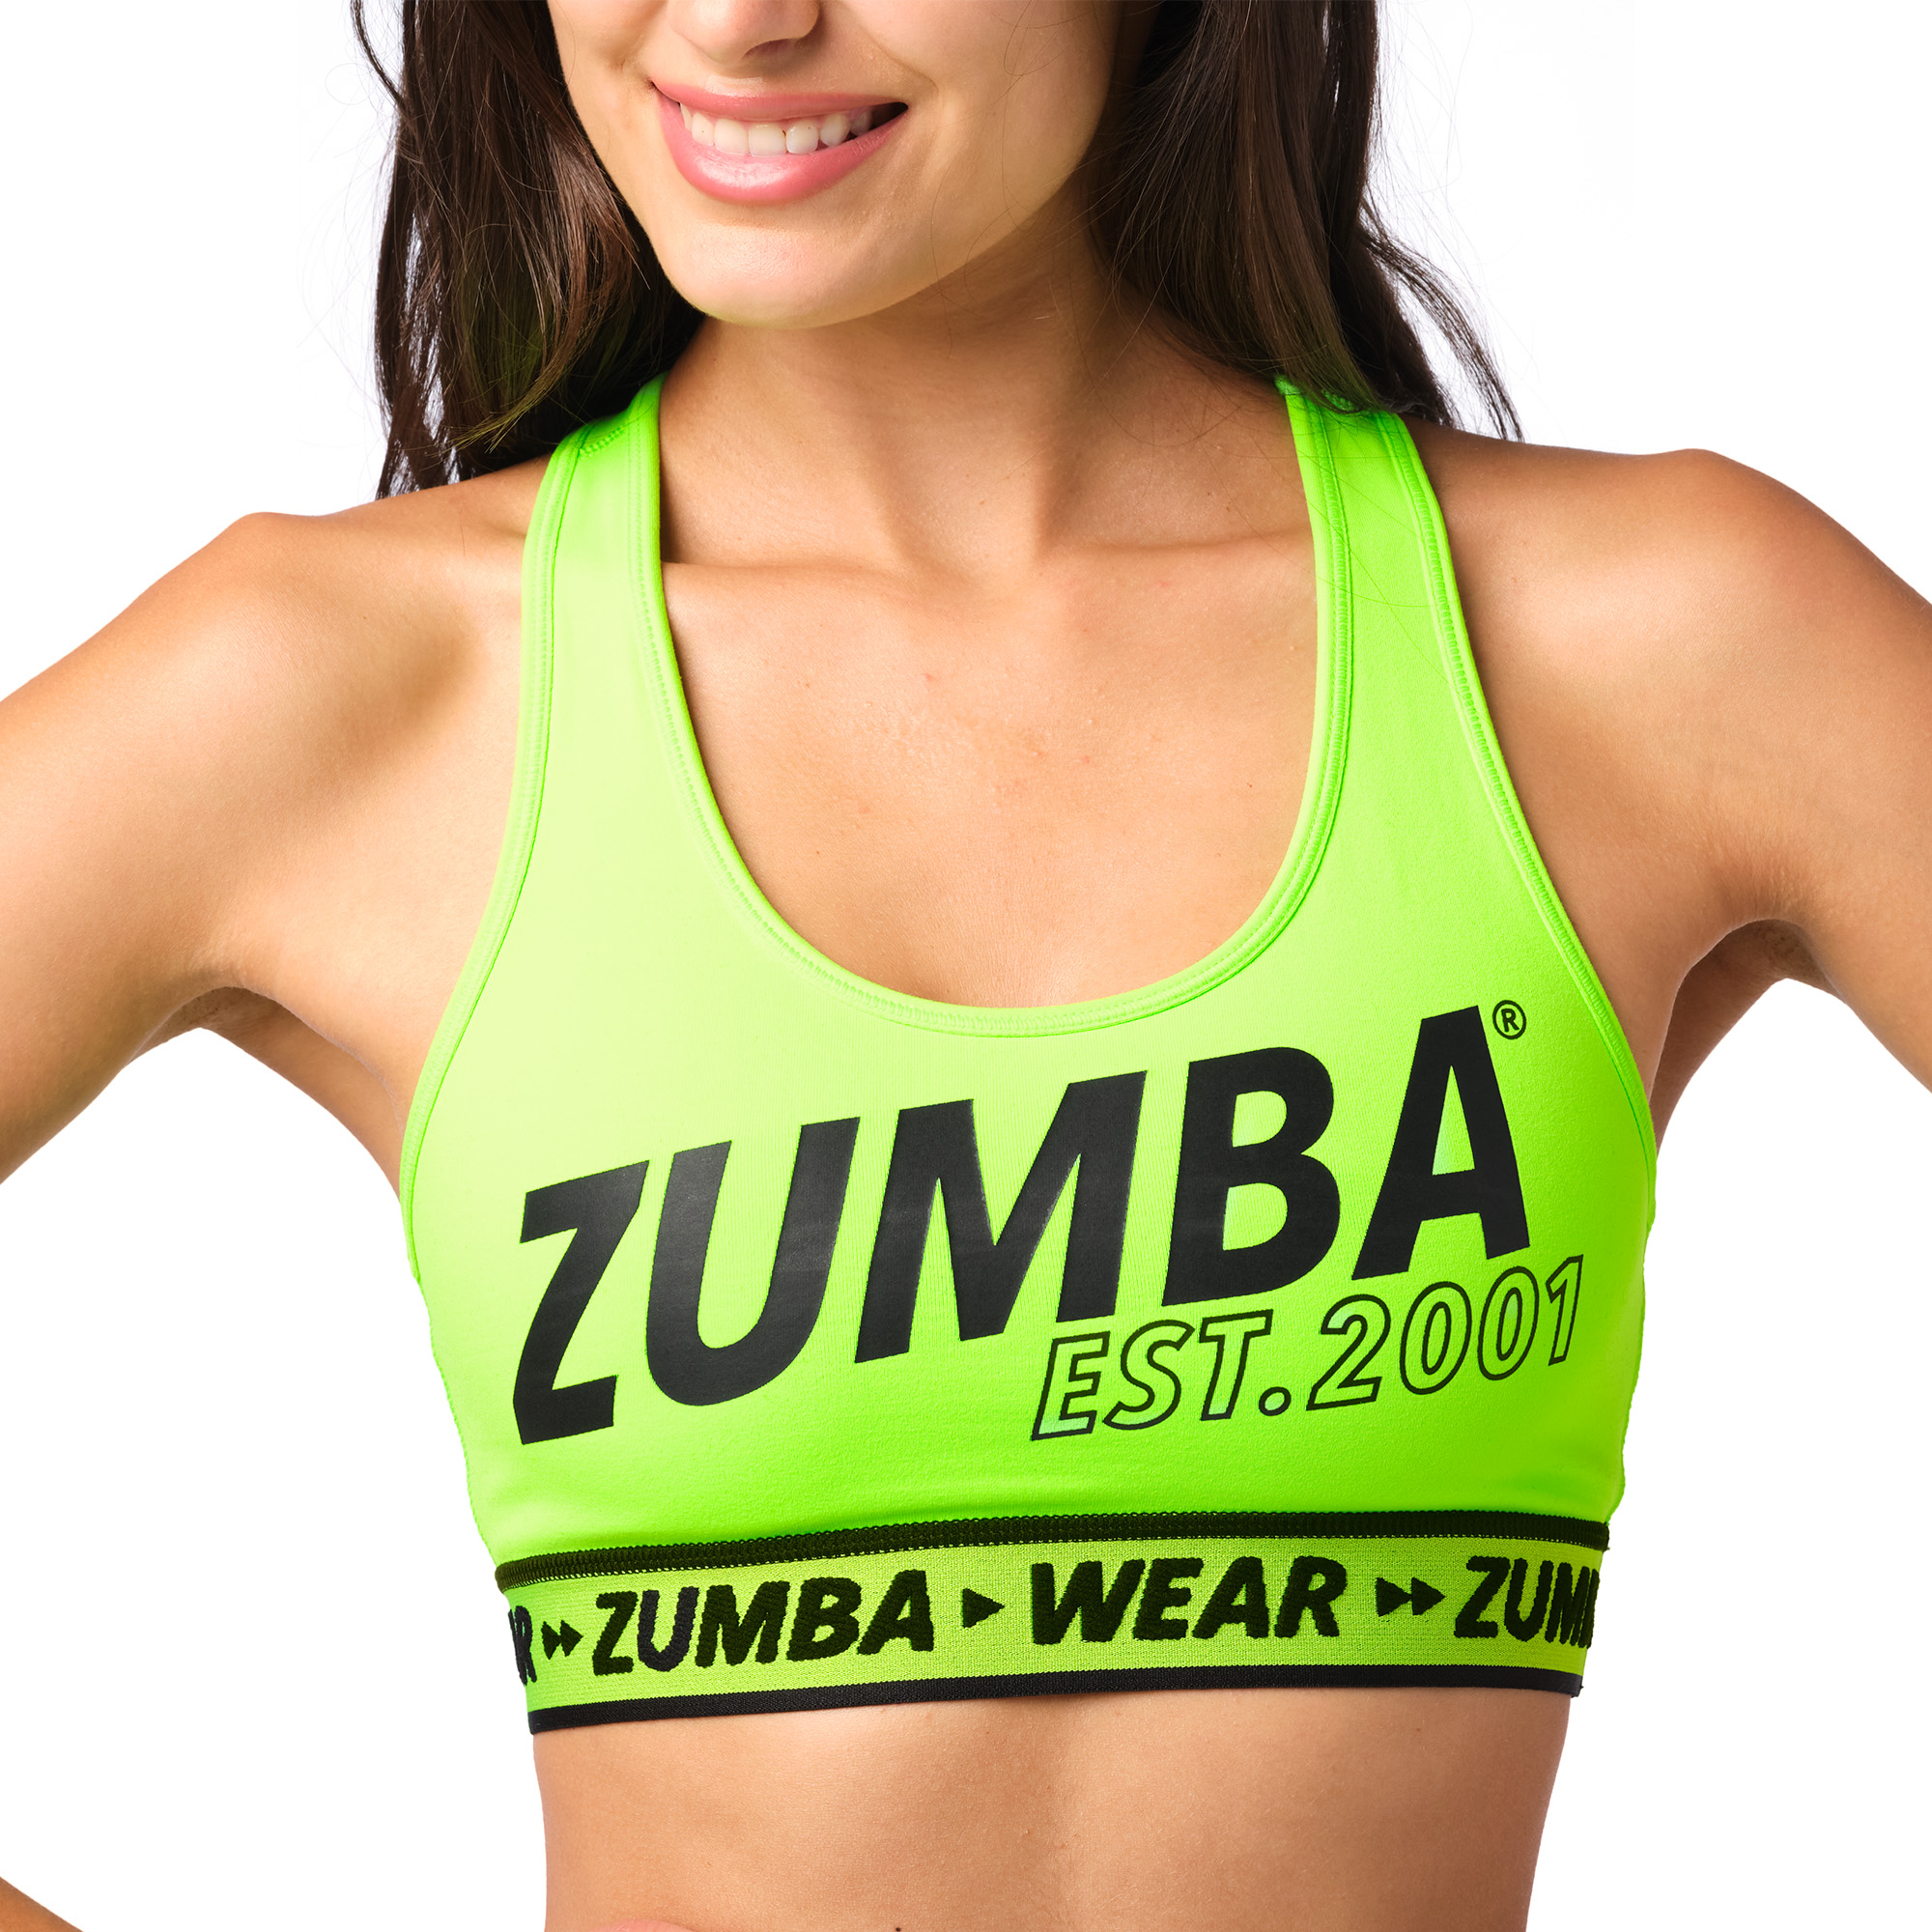 Zumba By Strong Nation sport bra size small military green.Z1T02695